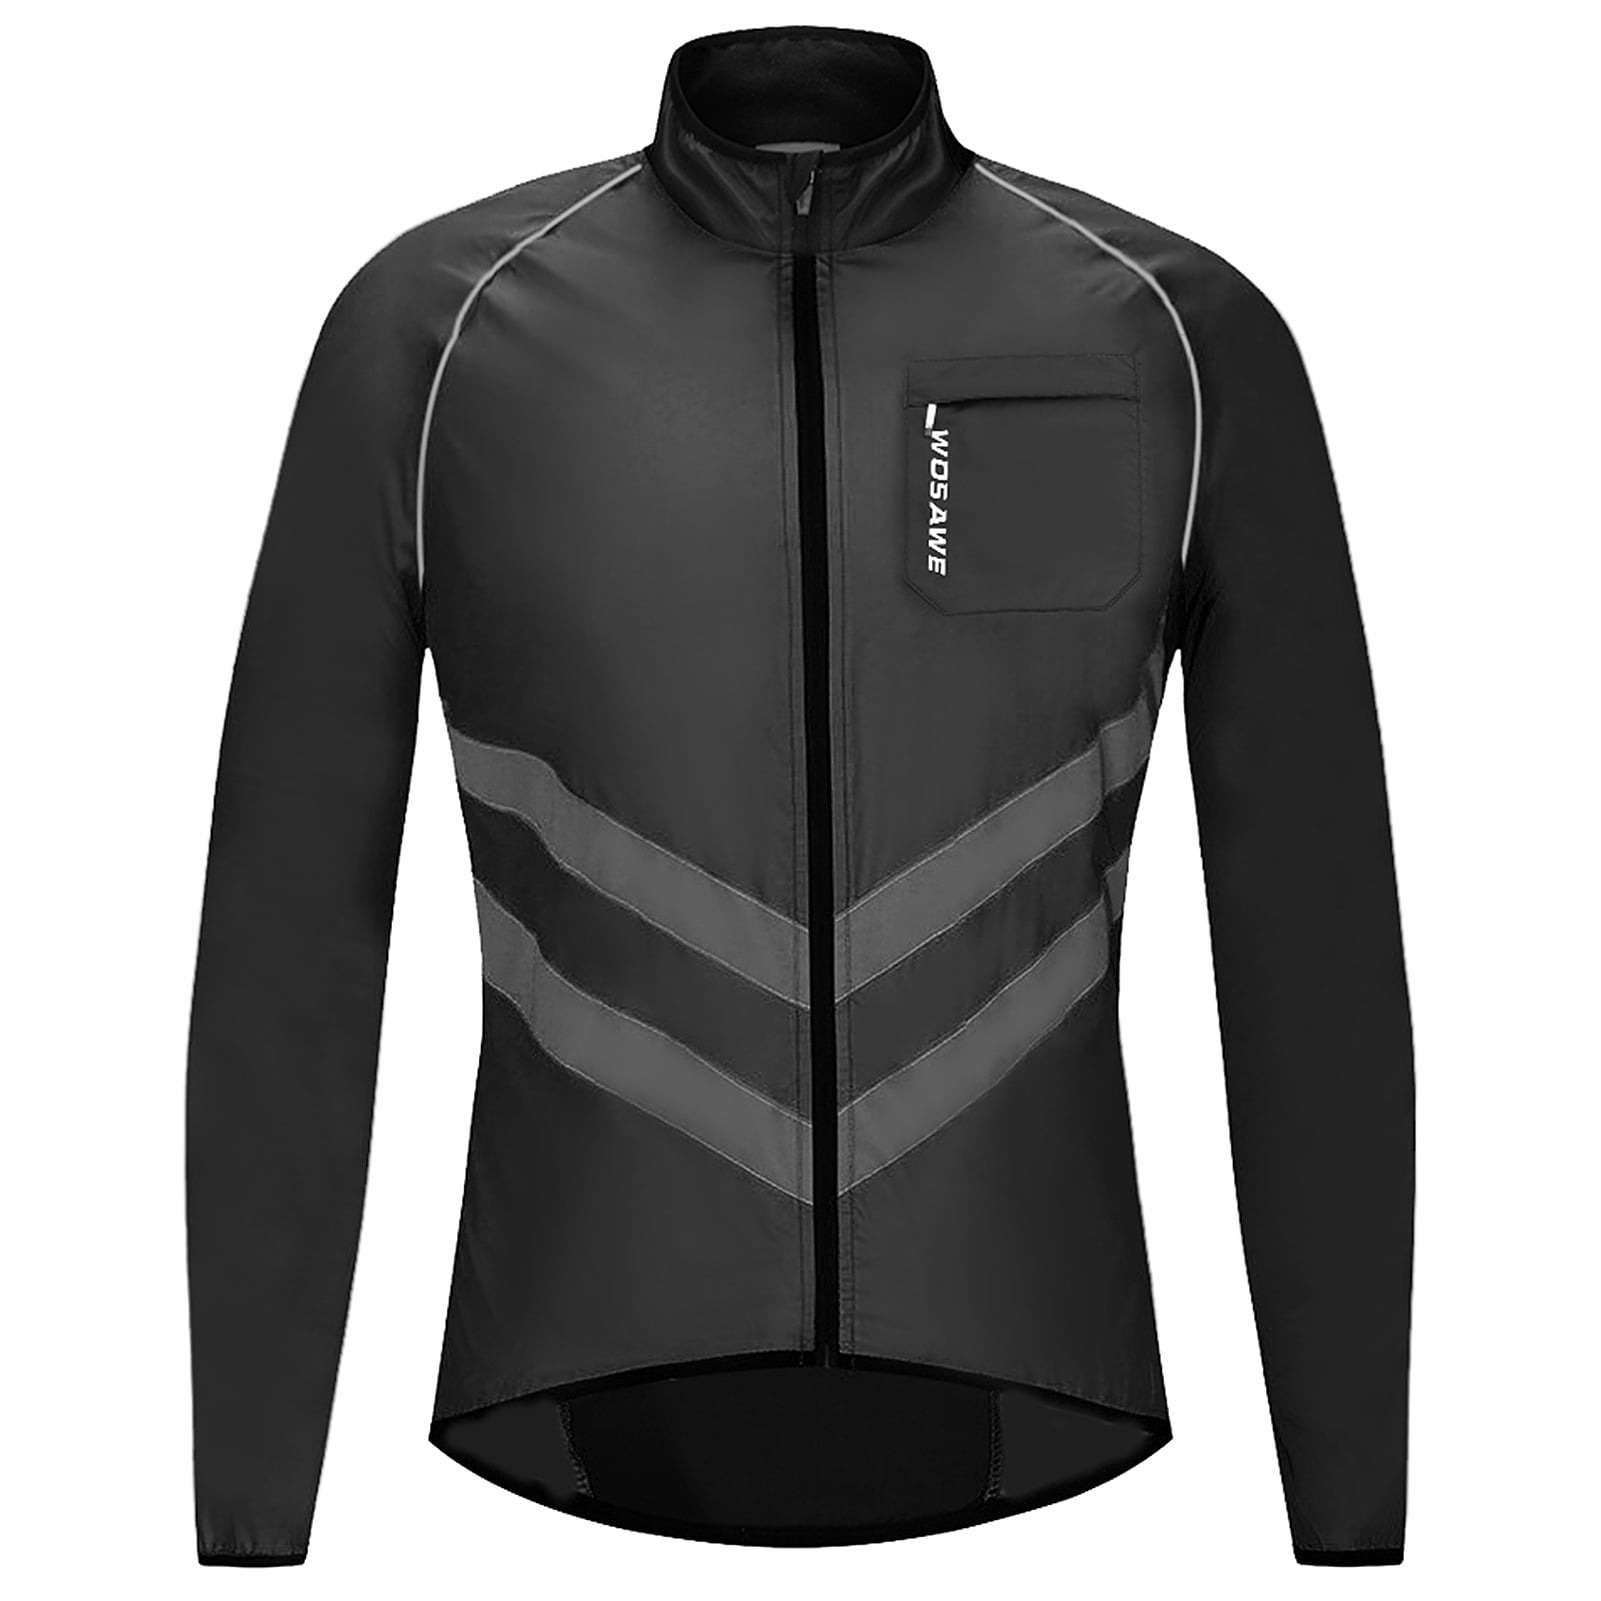 Cycling Jacket Jersey Riding Windproof Bicycle Jersey Long Sleeve Black 